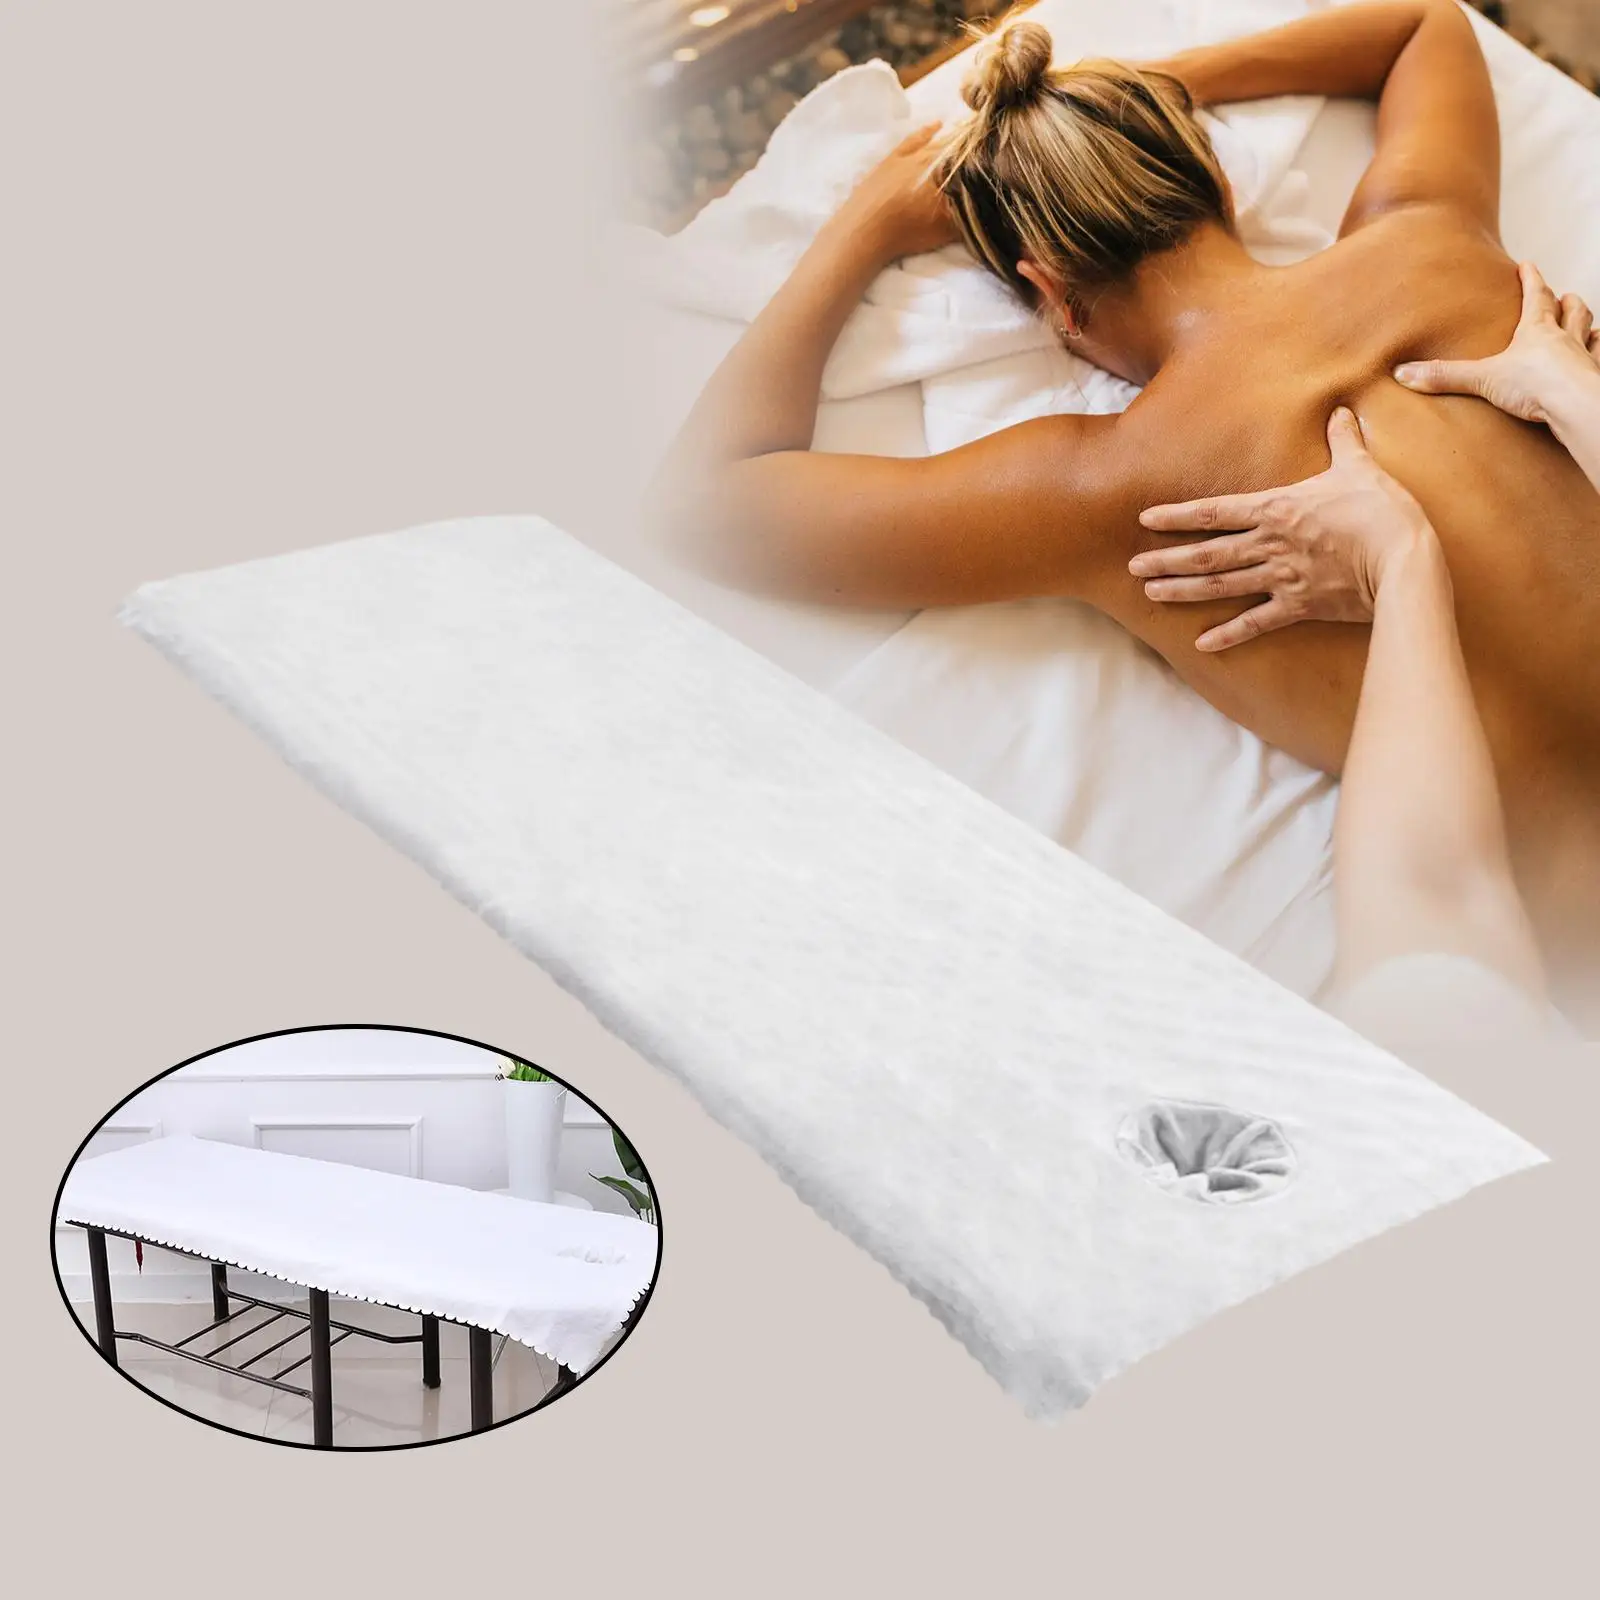 Massage Table Sheet Covers with Face Hole Soft Washable Polyester